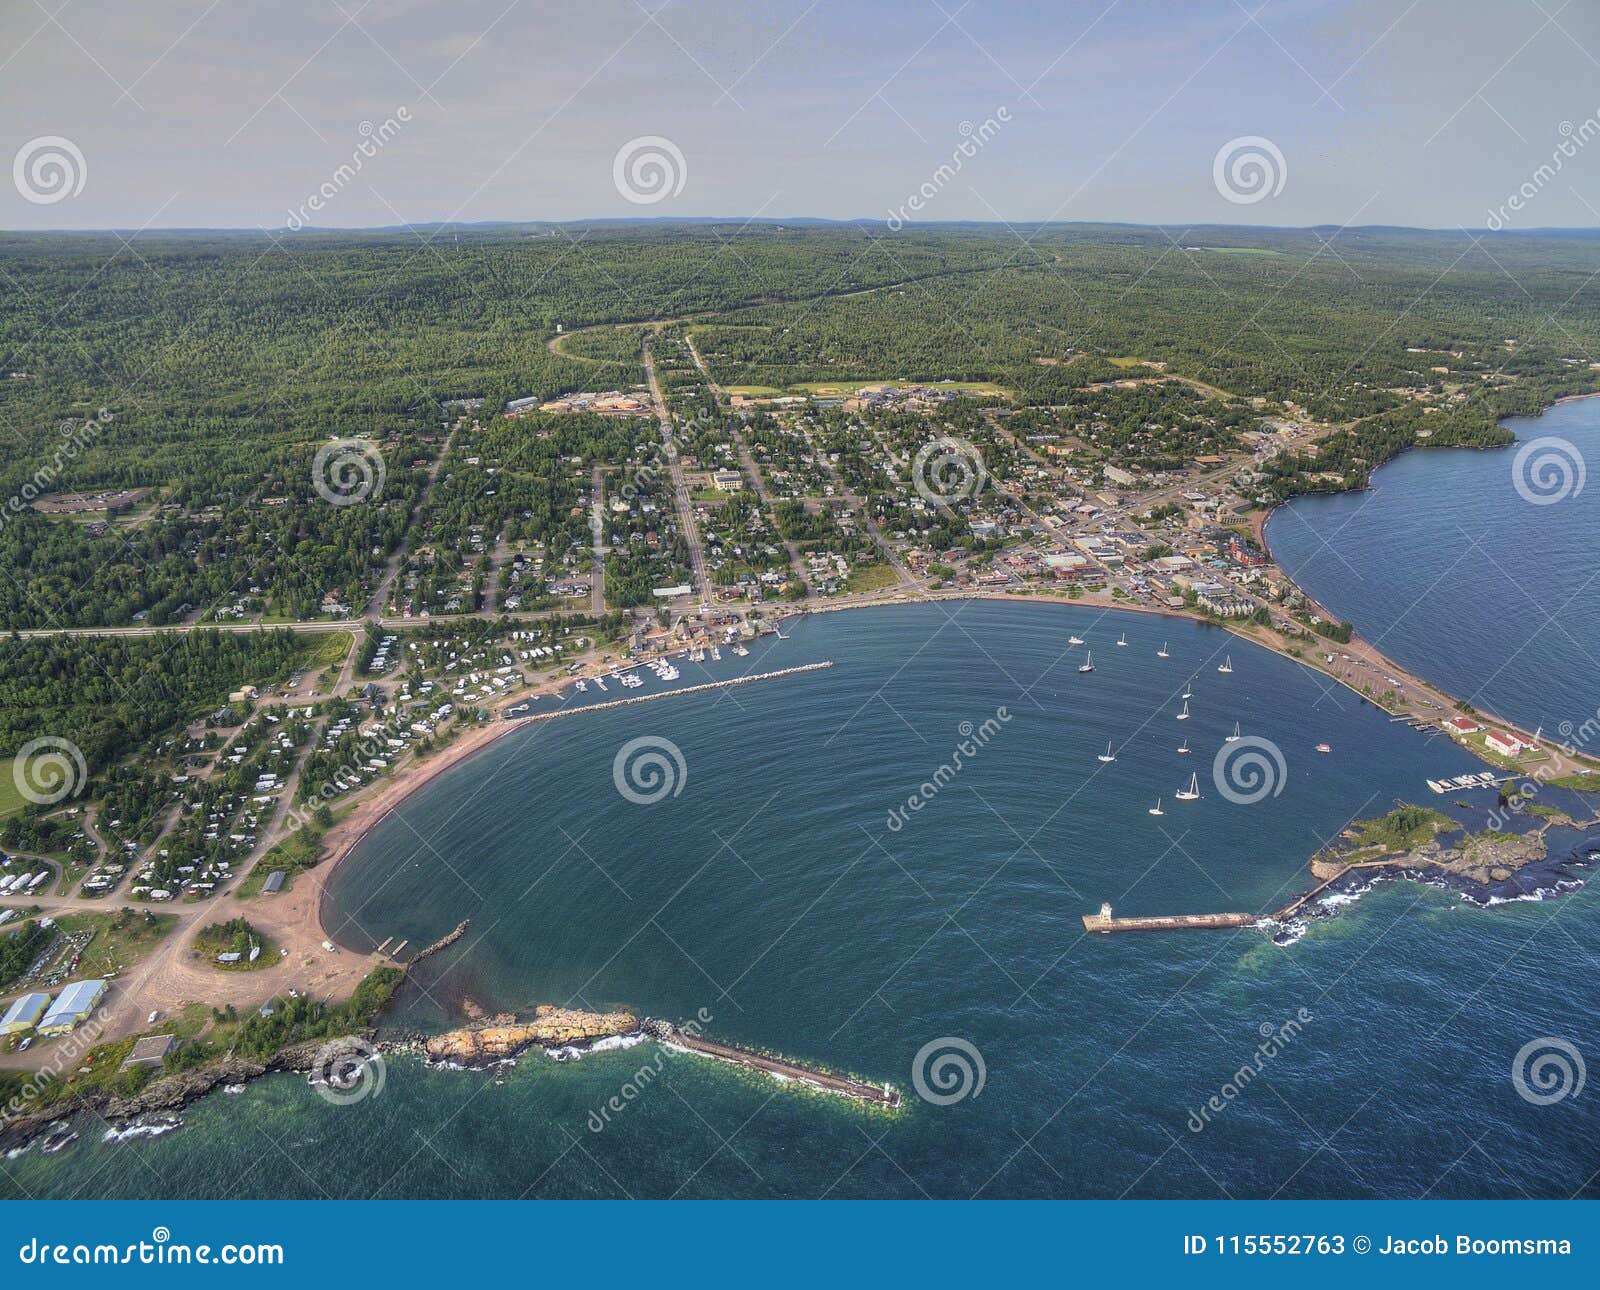 grand marais is a small harbor city on the north shore of lake superior in minnesota